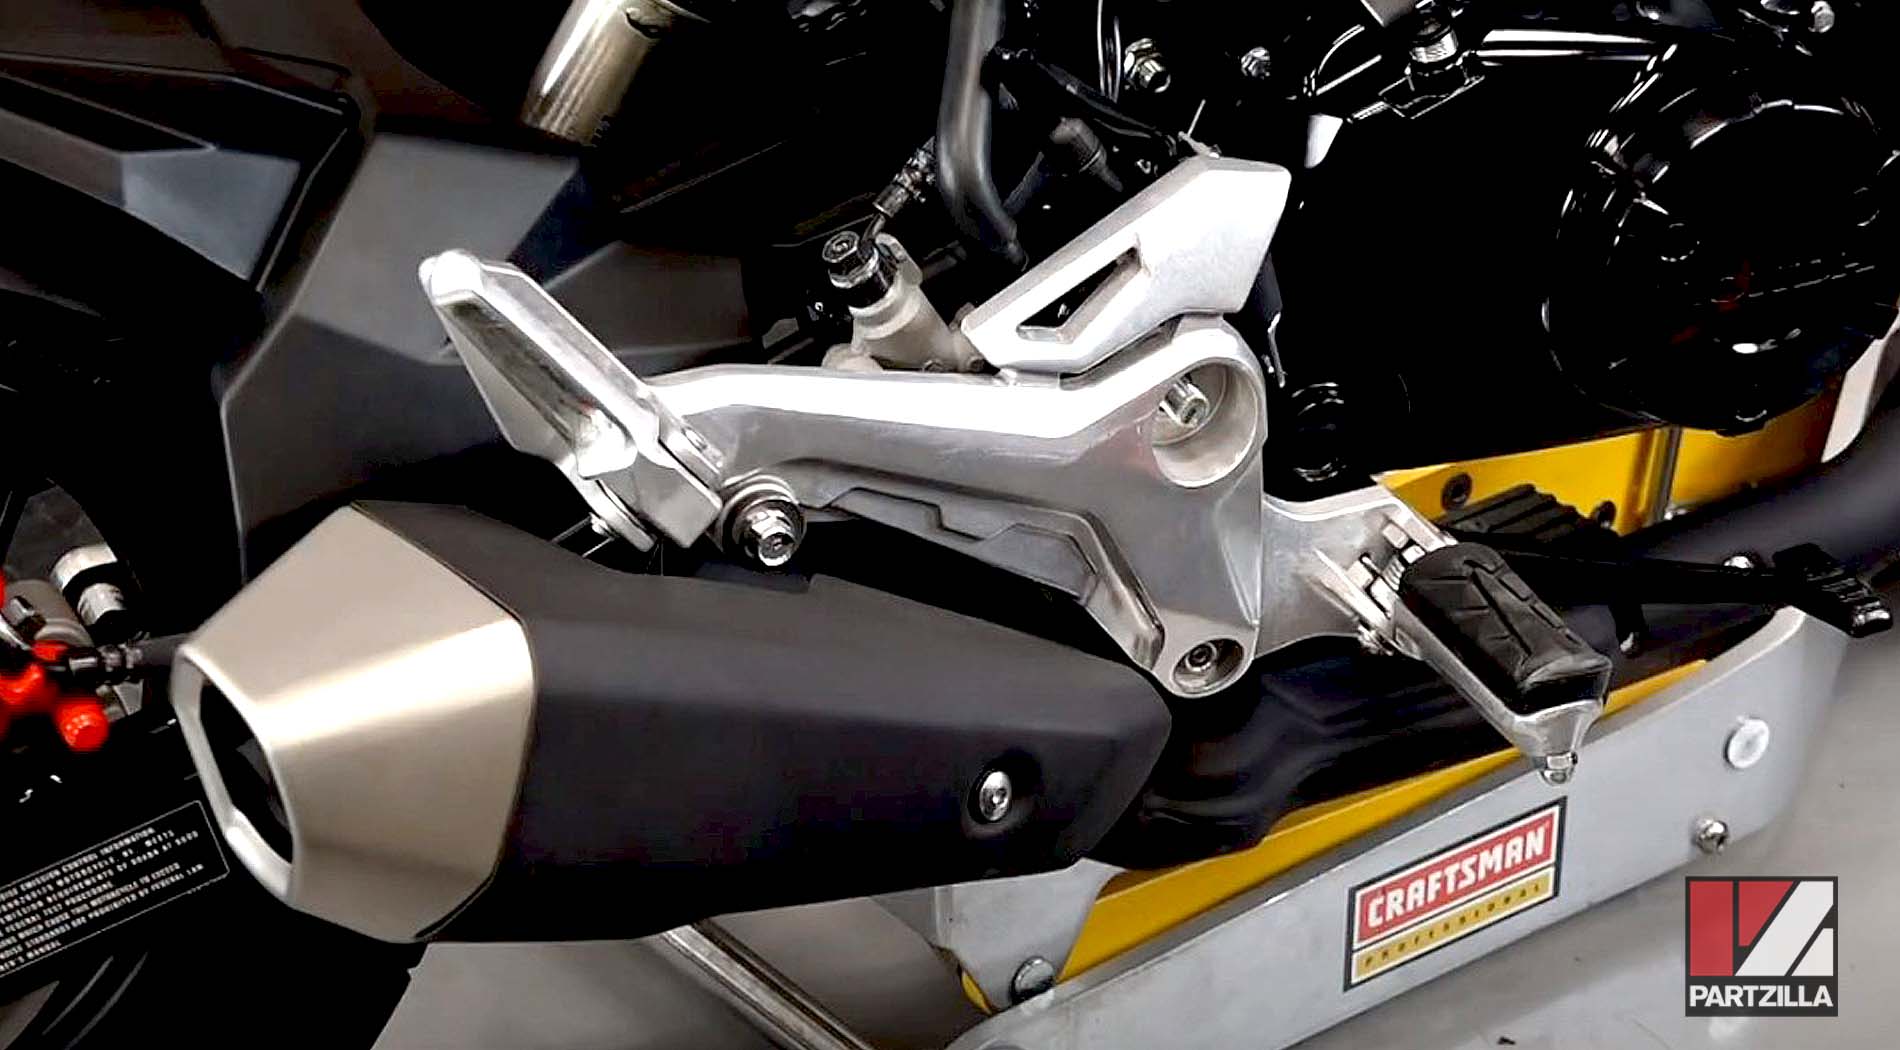 2018 Honda Grom ABS 125 rearset upgrade gearshift removal